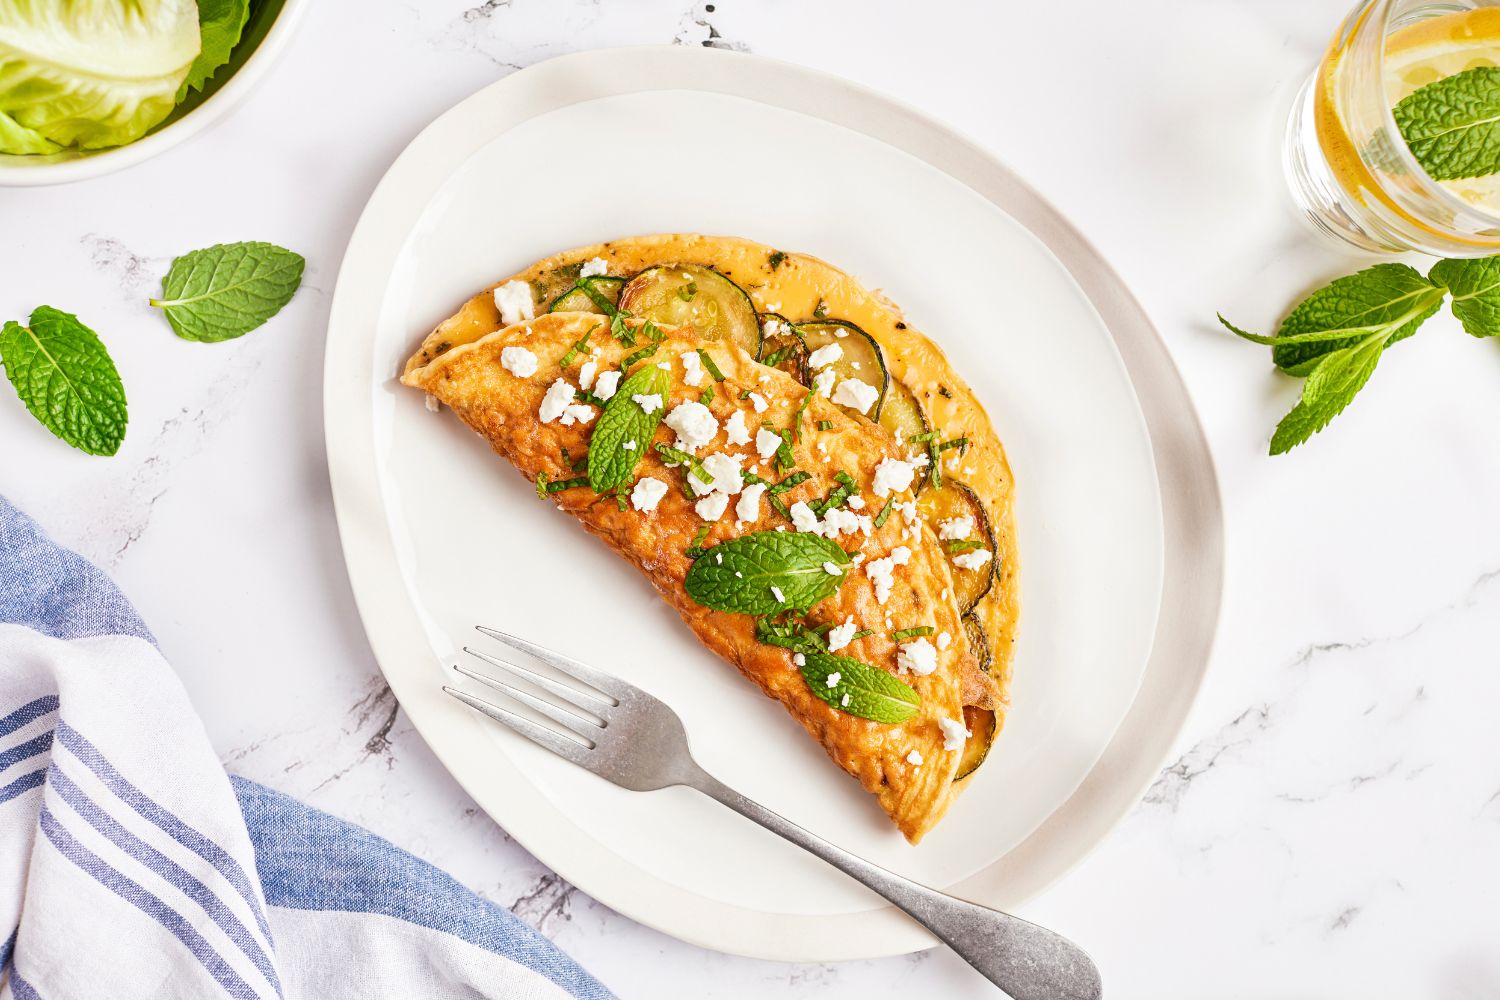 Cretan Omelet with Zucchini and Mint